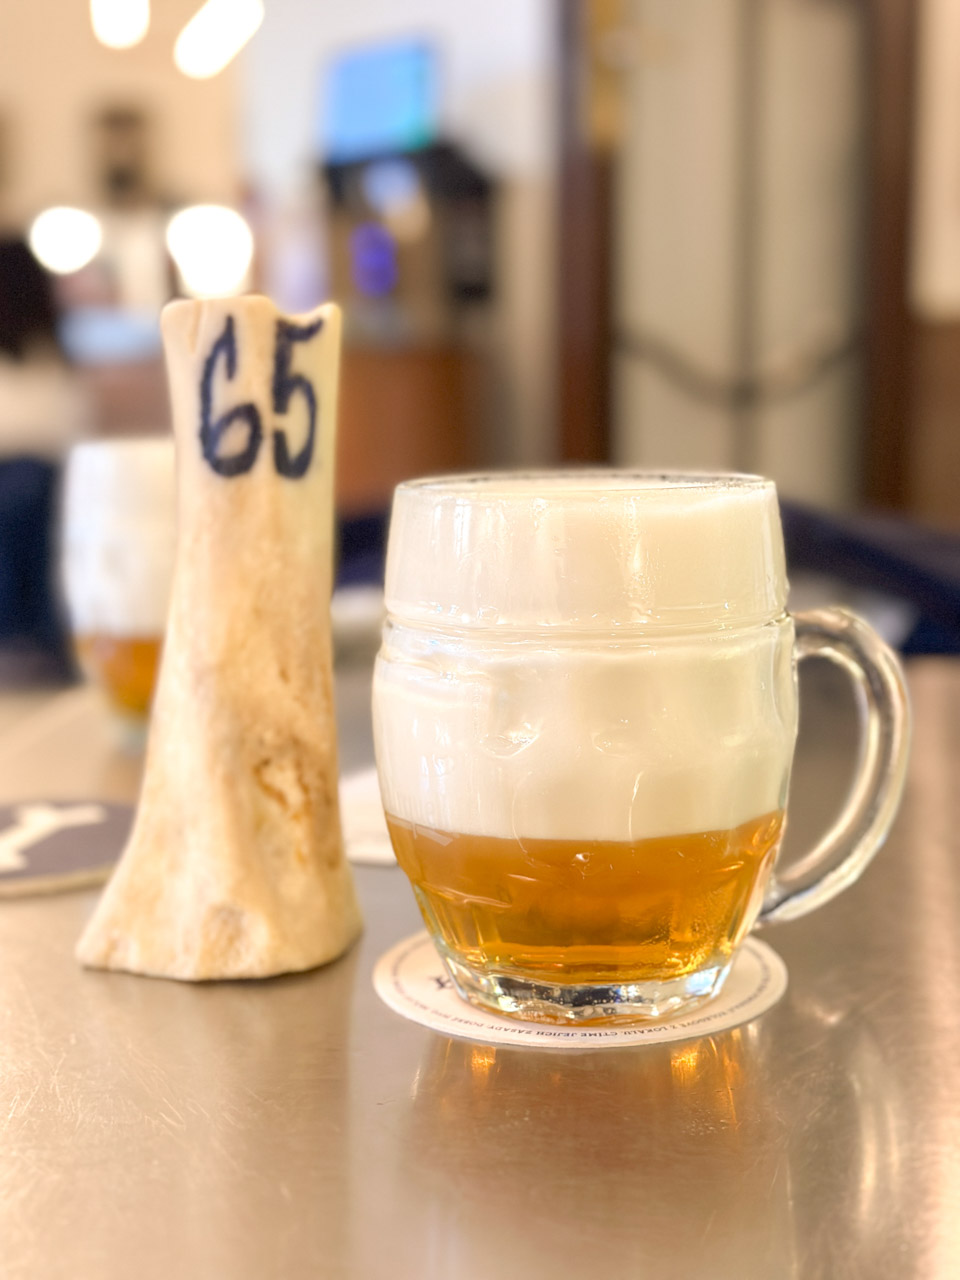 Glass of Mlíko on a table next to a bone with 65 written on it